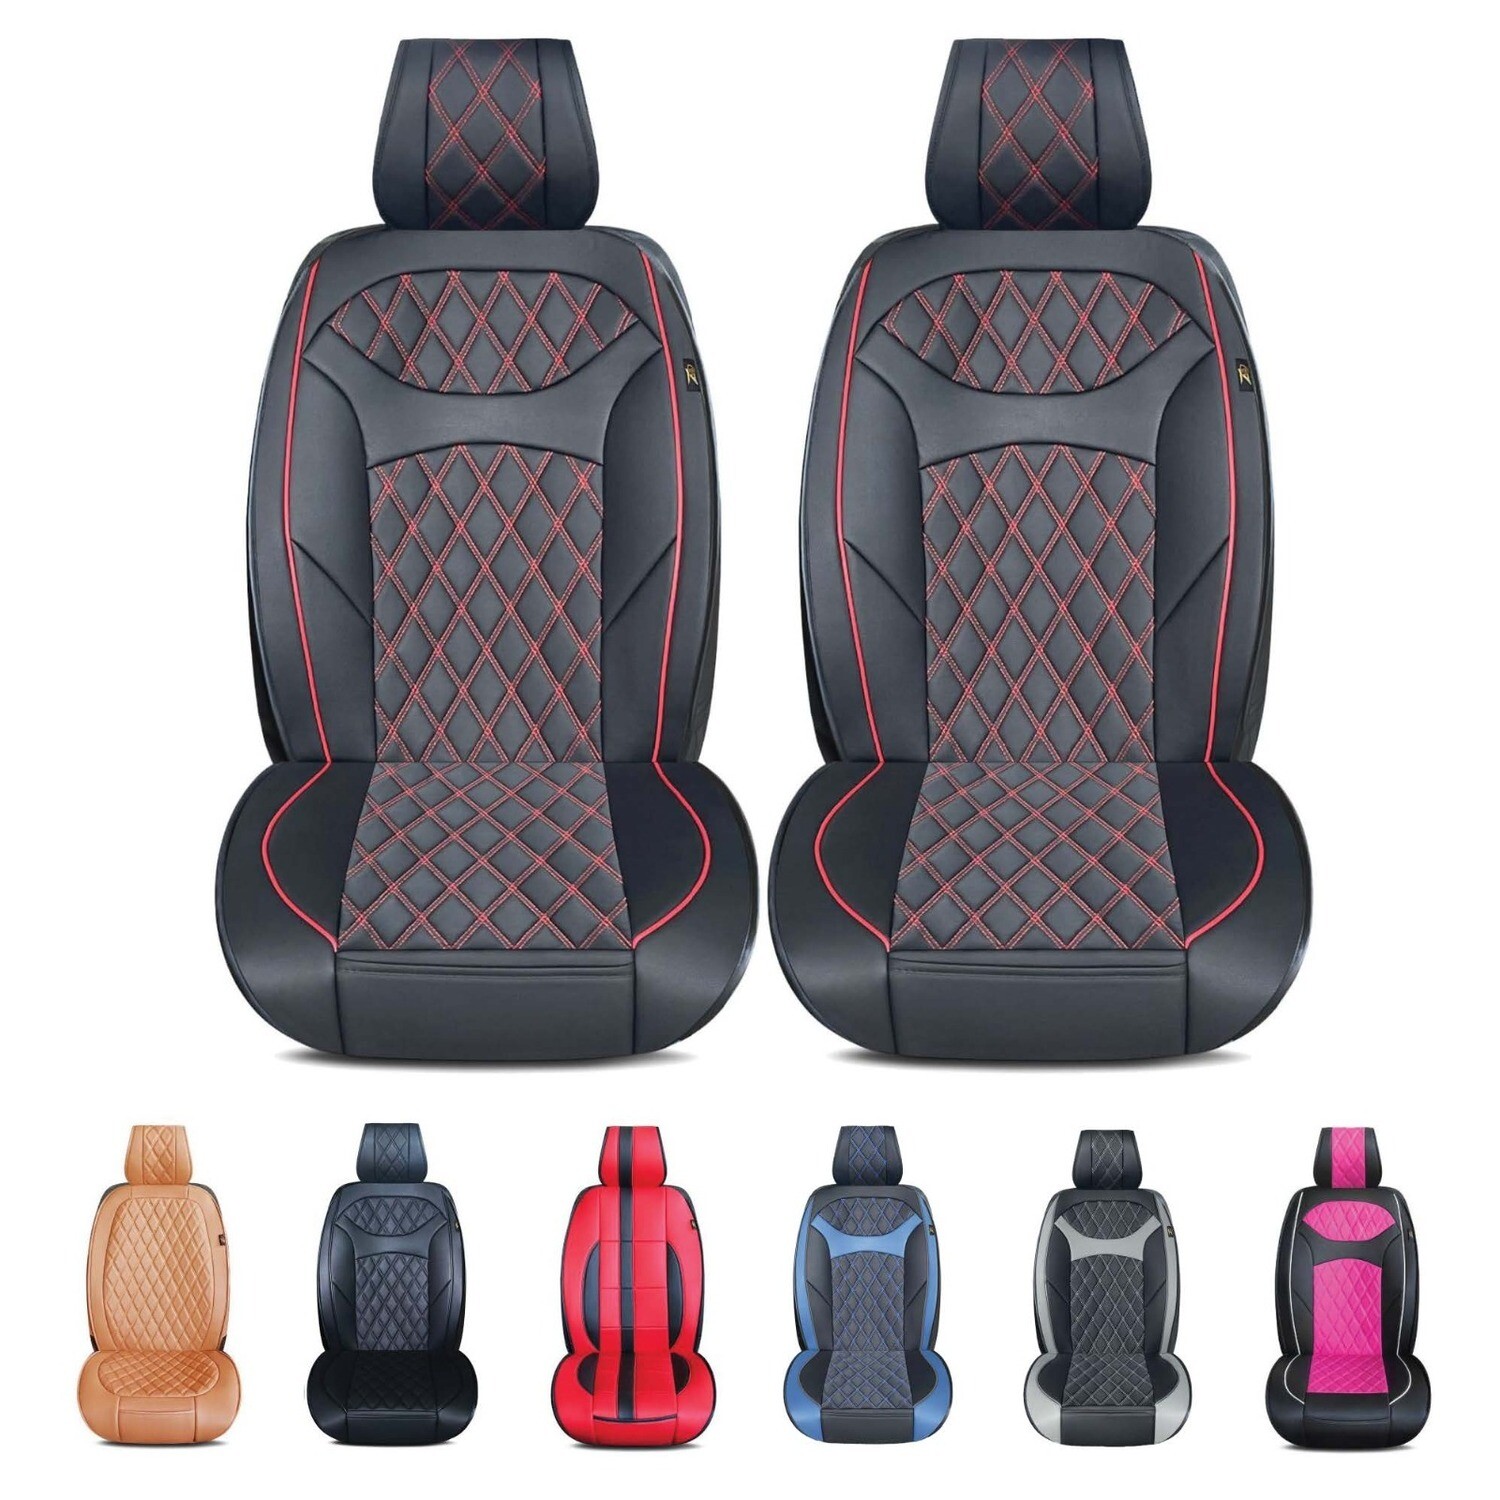 Universal PU Leather Car Seat Cover Cushion for Front Seat - 2 Pair - Black/Red